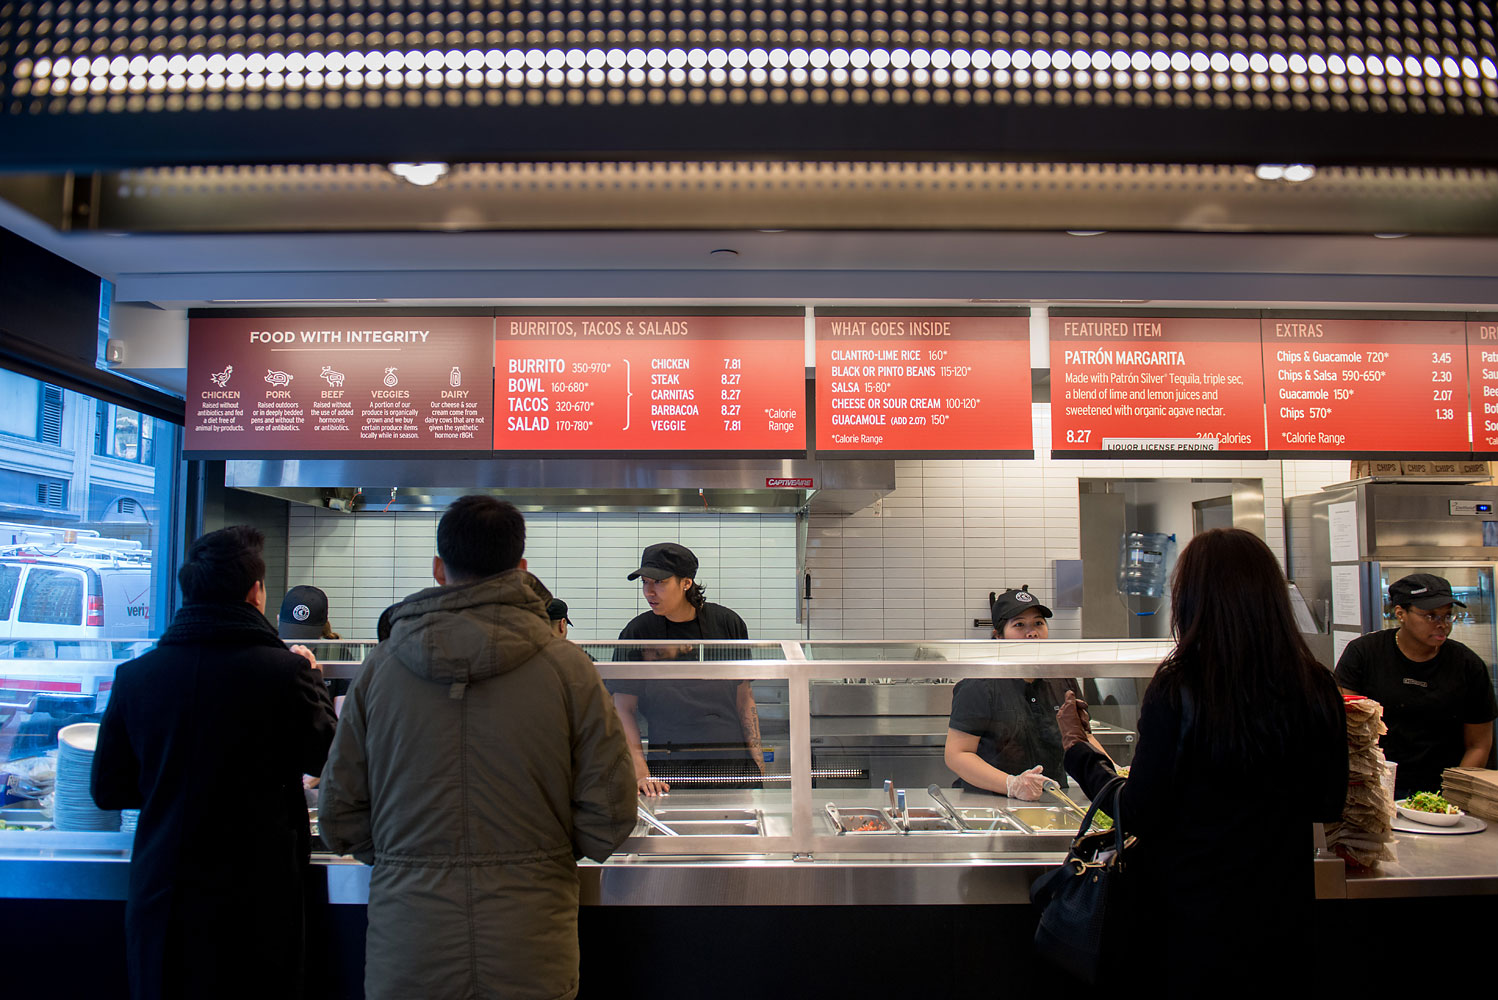 Lunchtime activites at Chipotle Mexican Grill's Madison Square Park Location in New York, Jan. 29, 2014. (Craig Warga—Bloomberg/Getty Images)